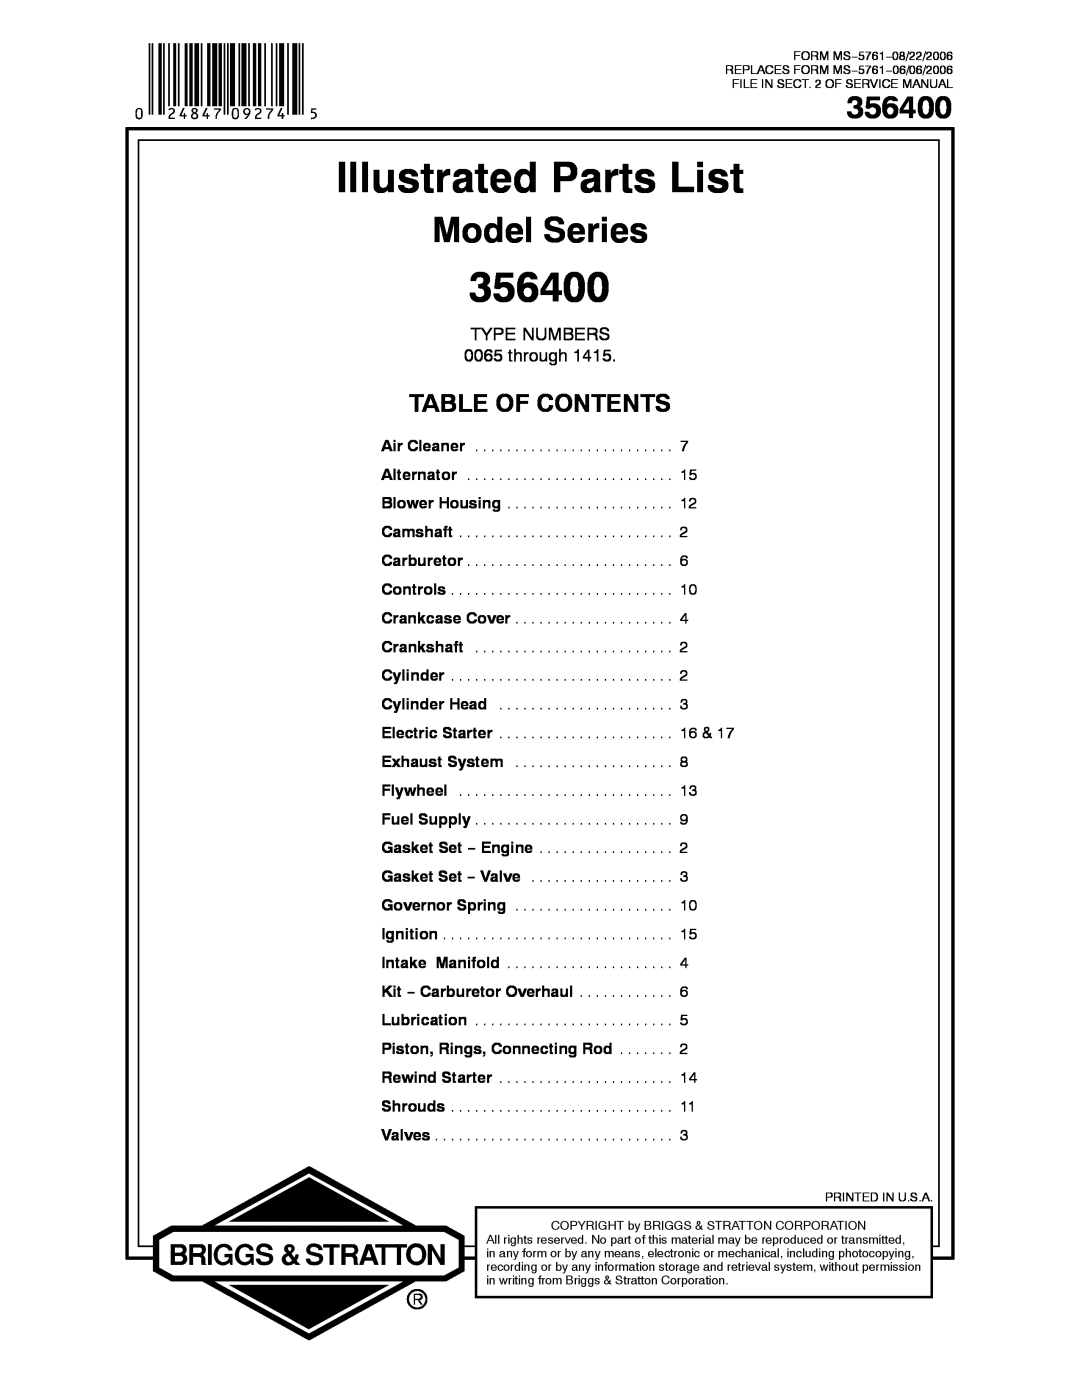 Briggs & Stratton 356400 service manual Illustrated Parts List, Model Series, Table Of Contents, TYPE NUMBERS 0065 through 